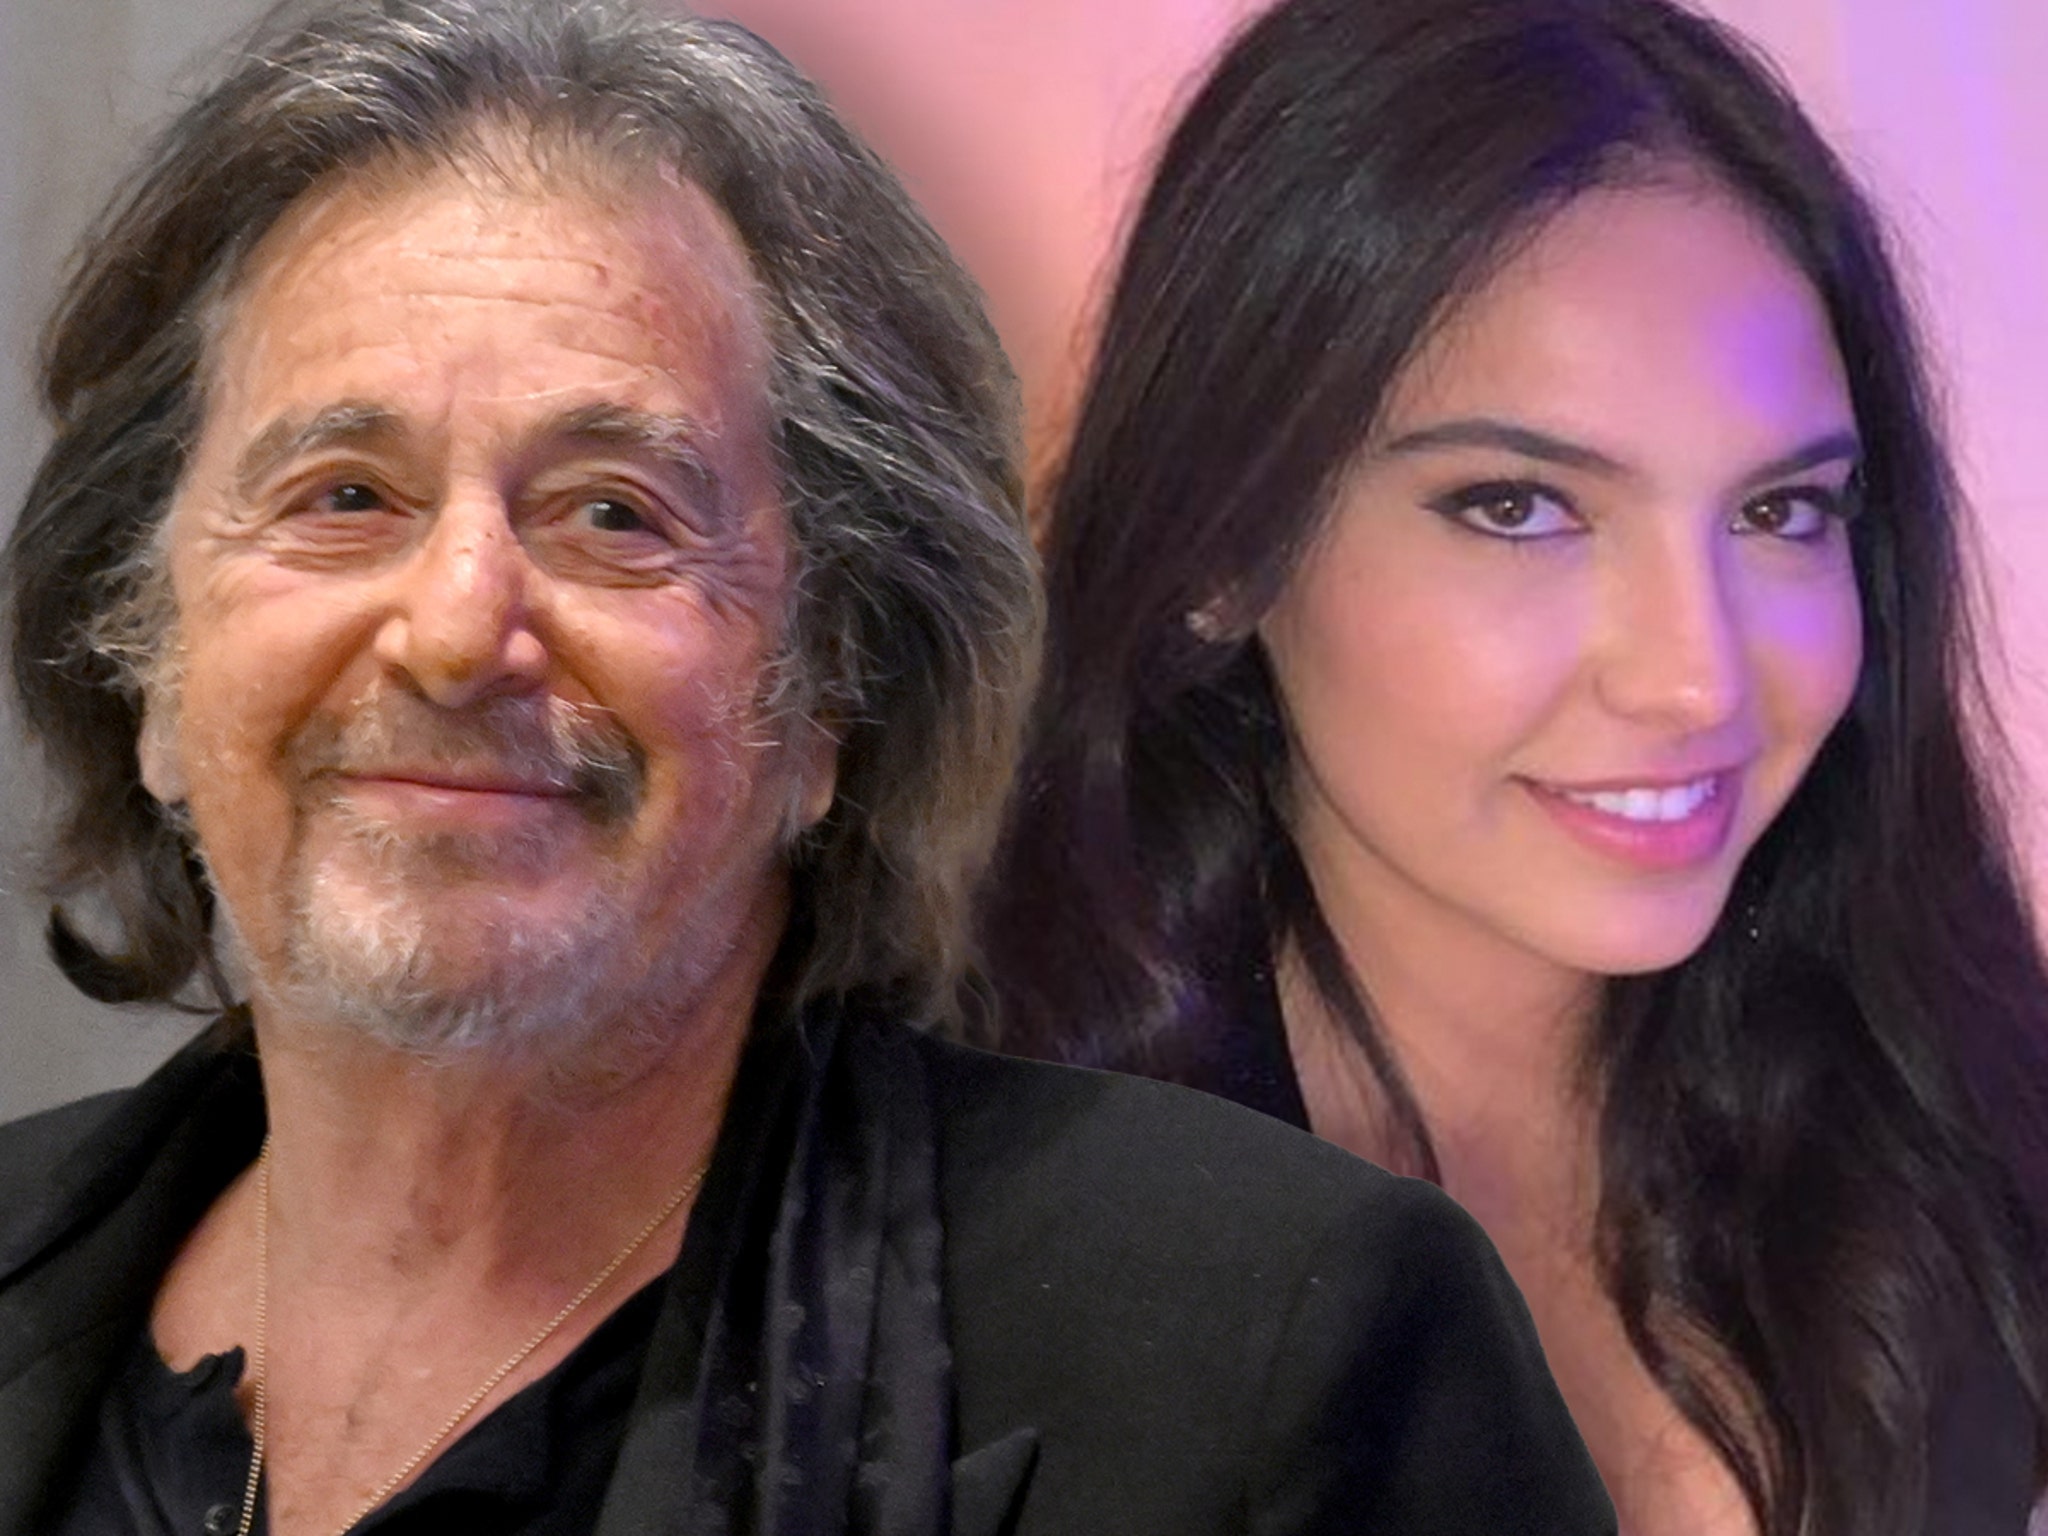 Al Pacino, 83, Surprised By 29-Year-Old Girlfriends Pregnancy pic